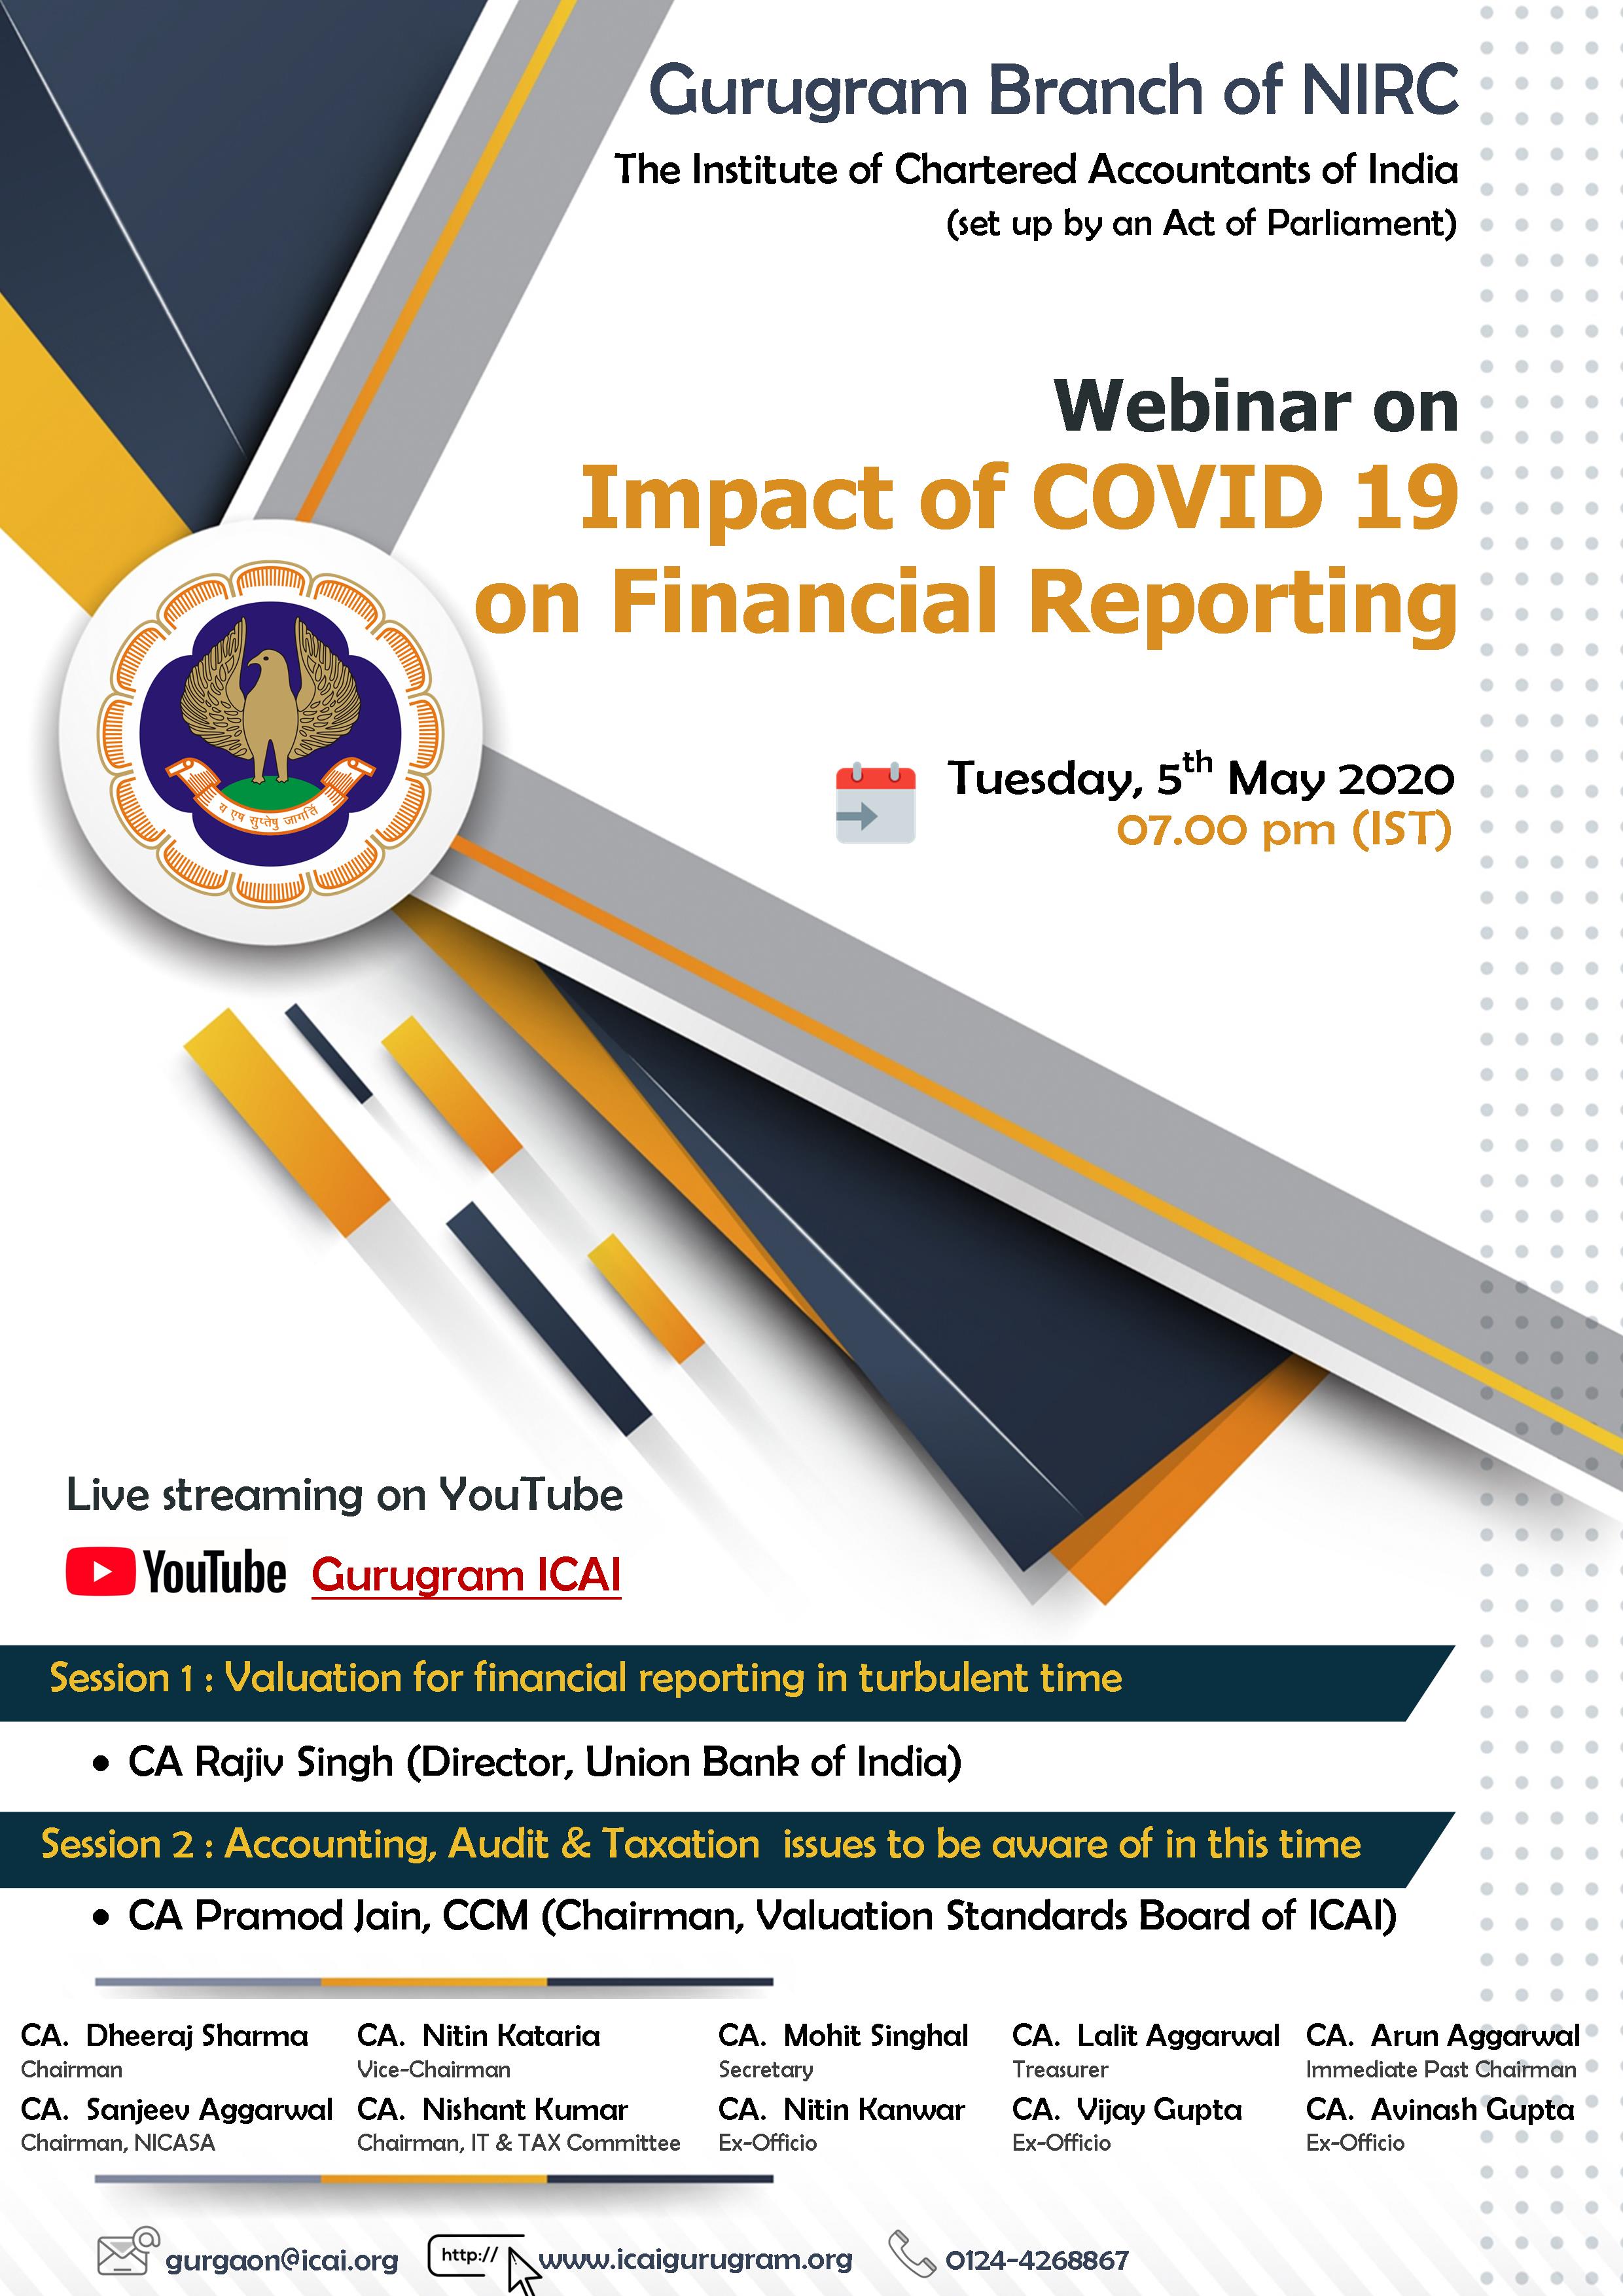 Webinar on Impact of COVID 19 on Financial Reporting